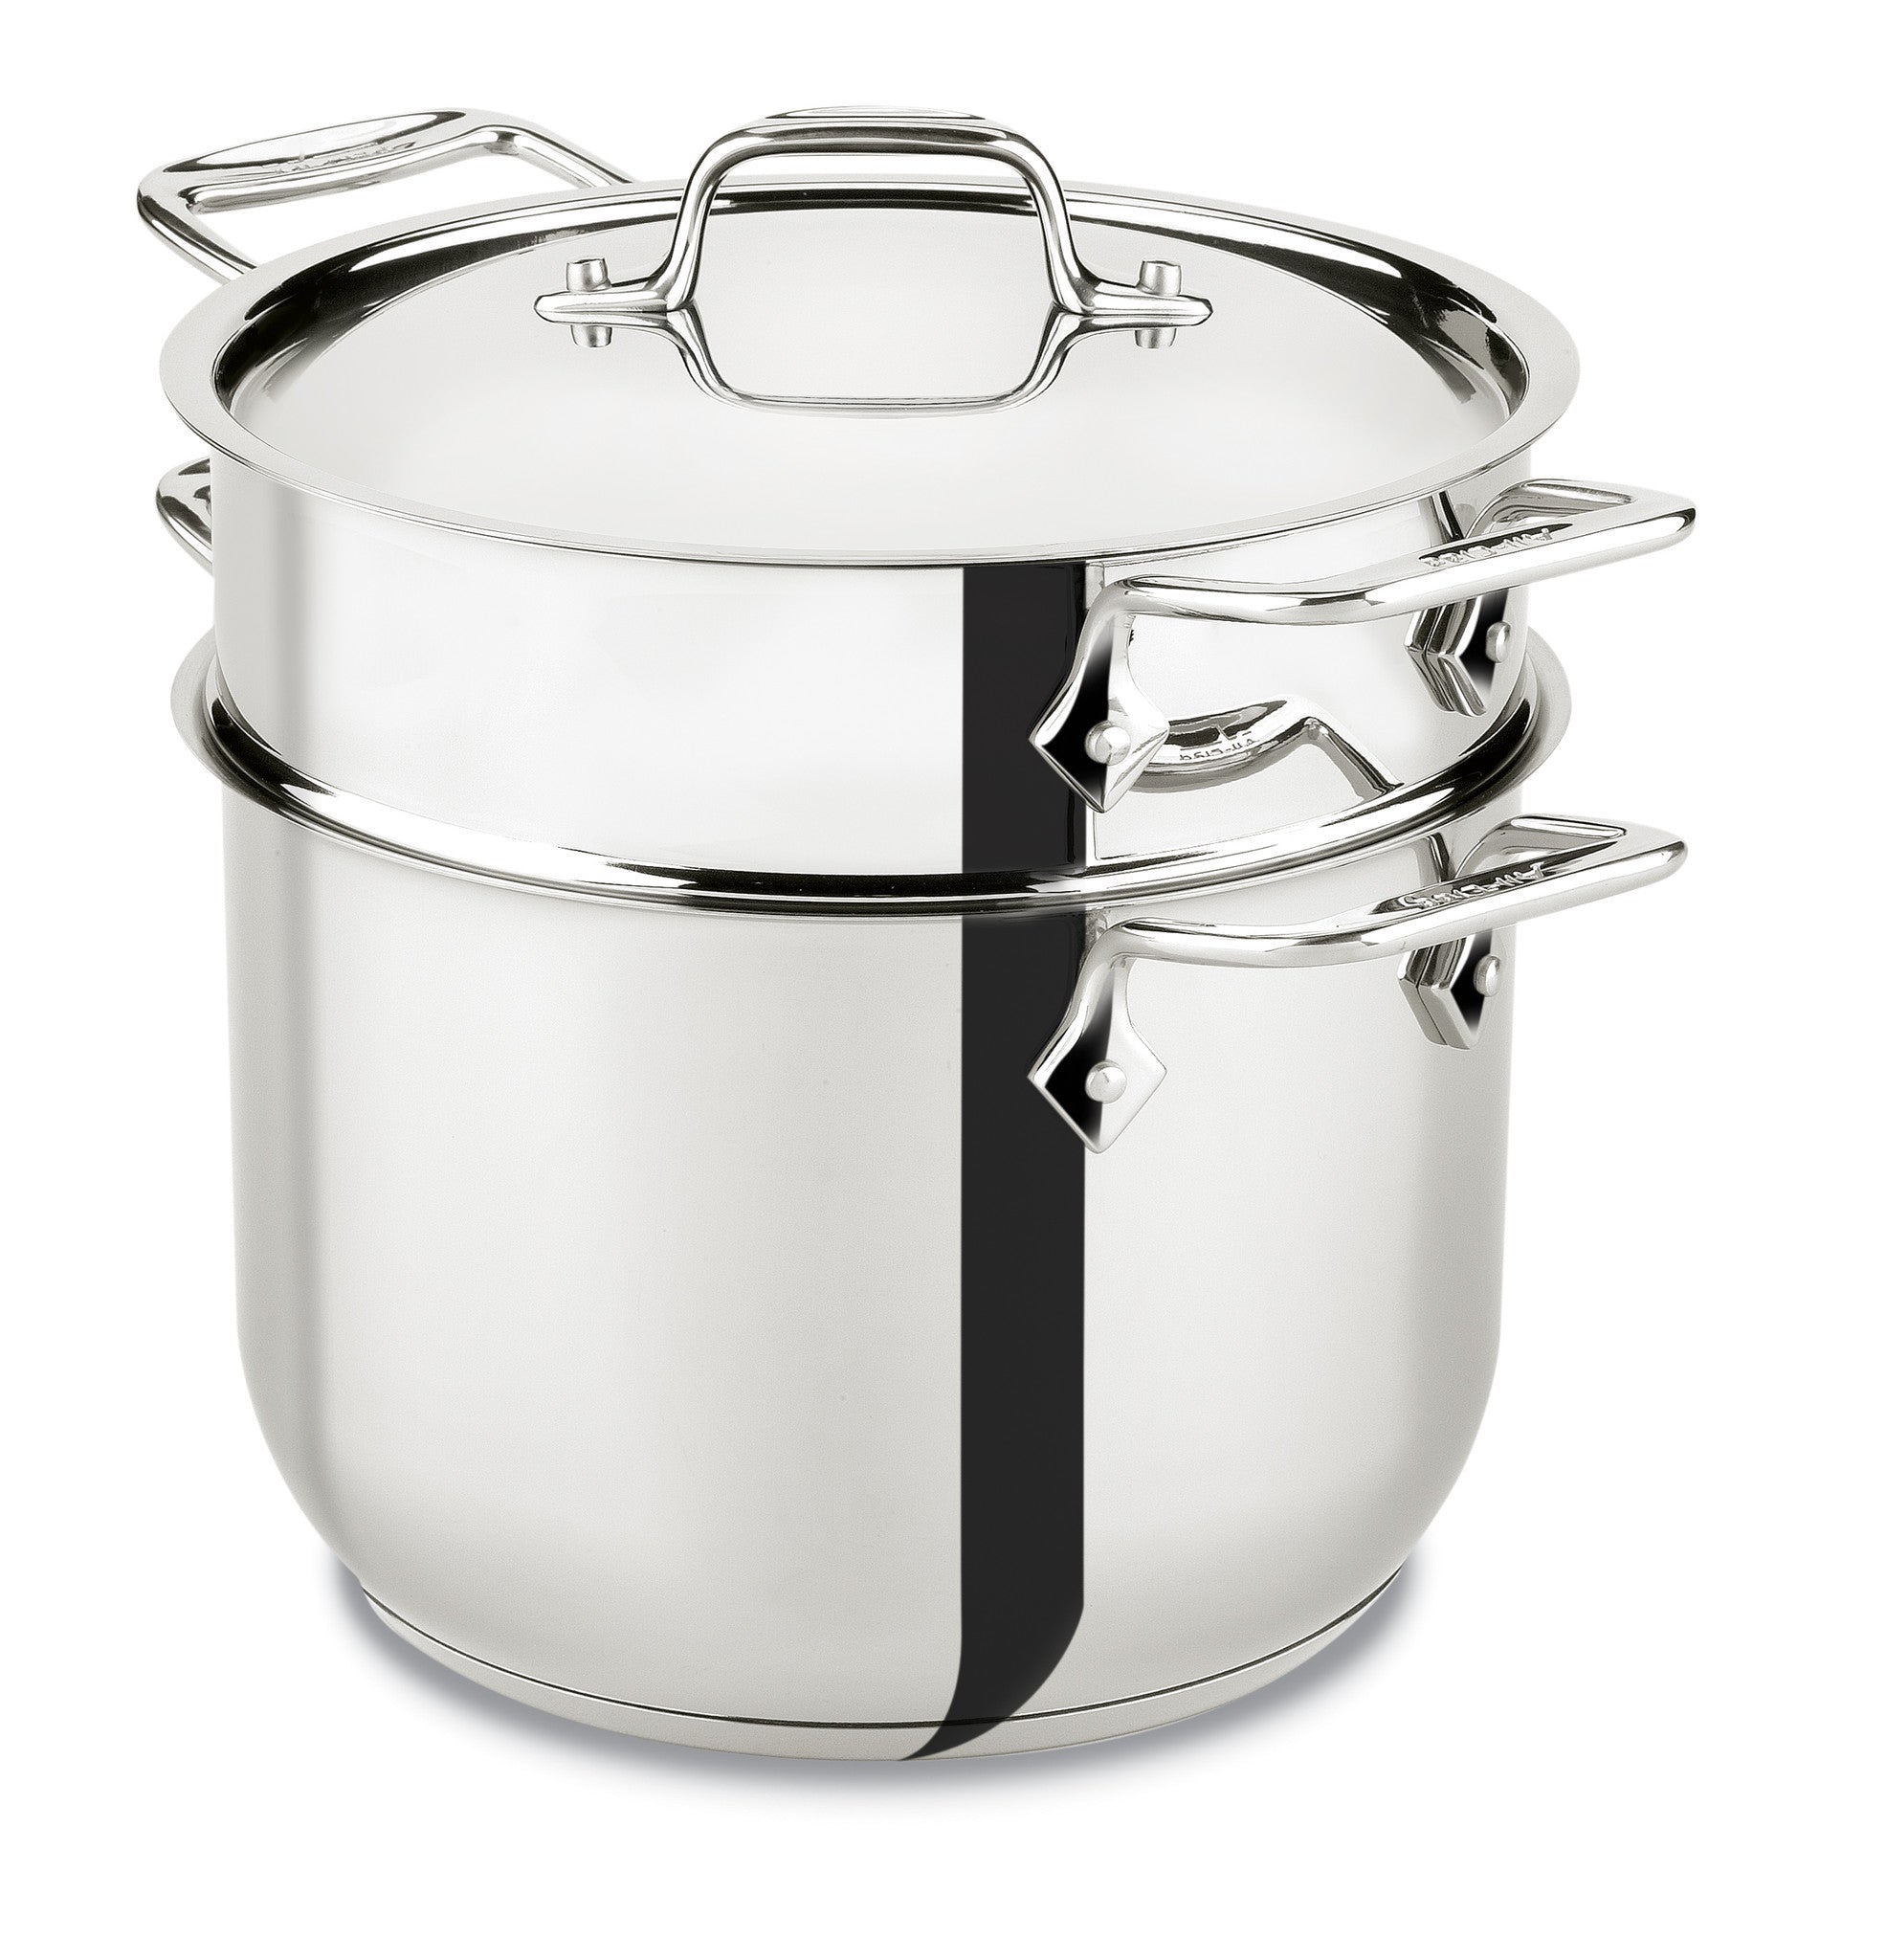 8-Quart D3 Stainless Steel Stockpot I All-Clad